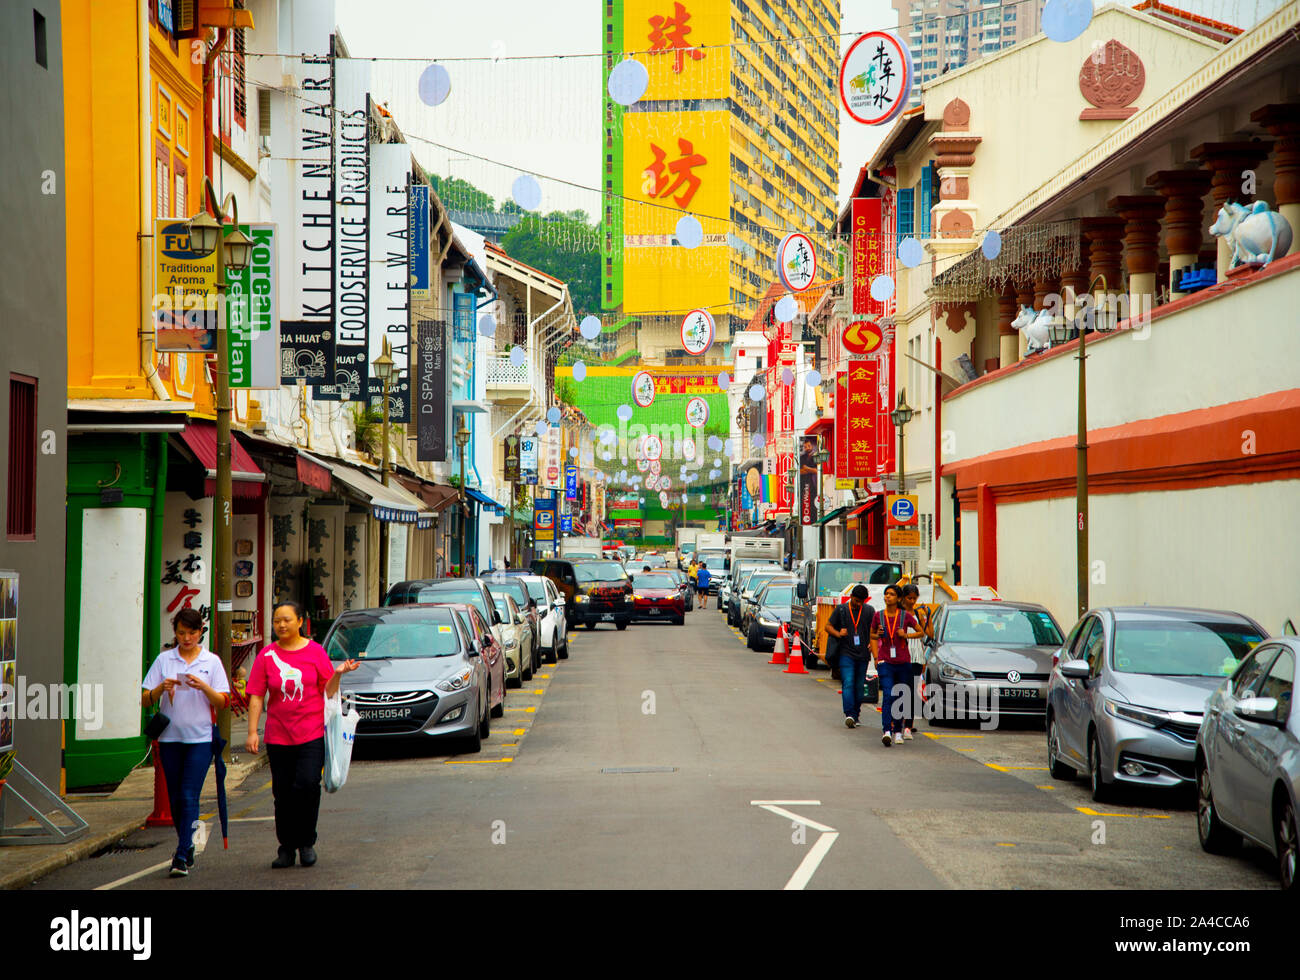 SINGAPORE CITY, SINGAPORE - April 11, 2019: Colorful street in Chinatown district Stock Photo